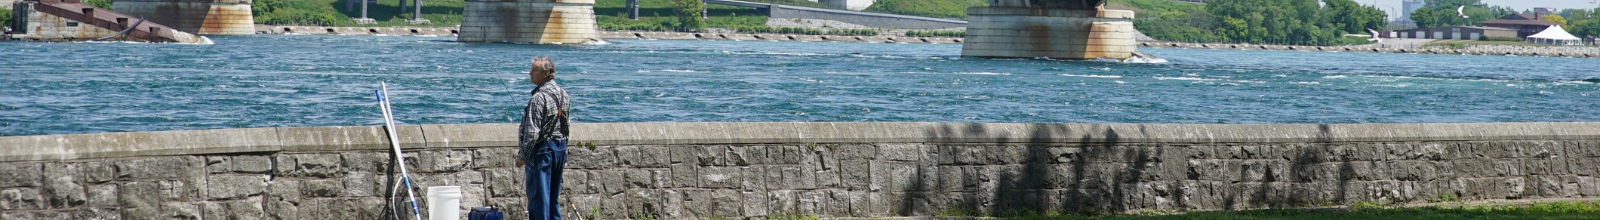 A person stands next to a river break wall with a fishing rod